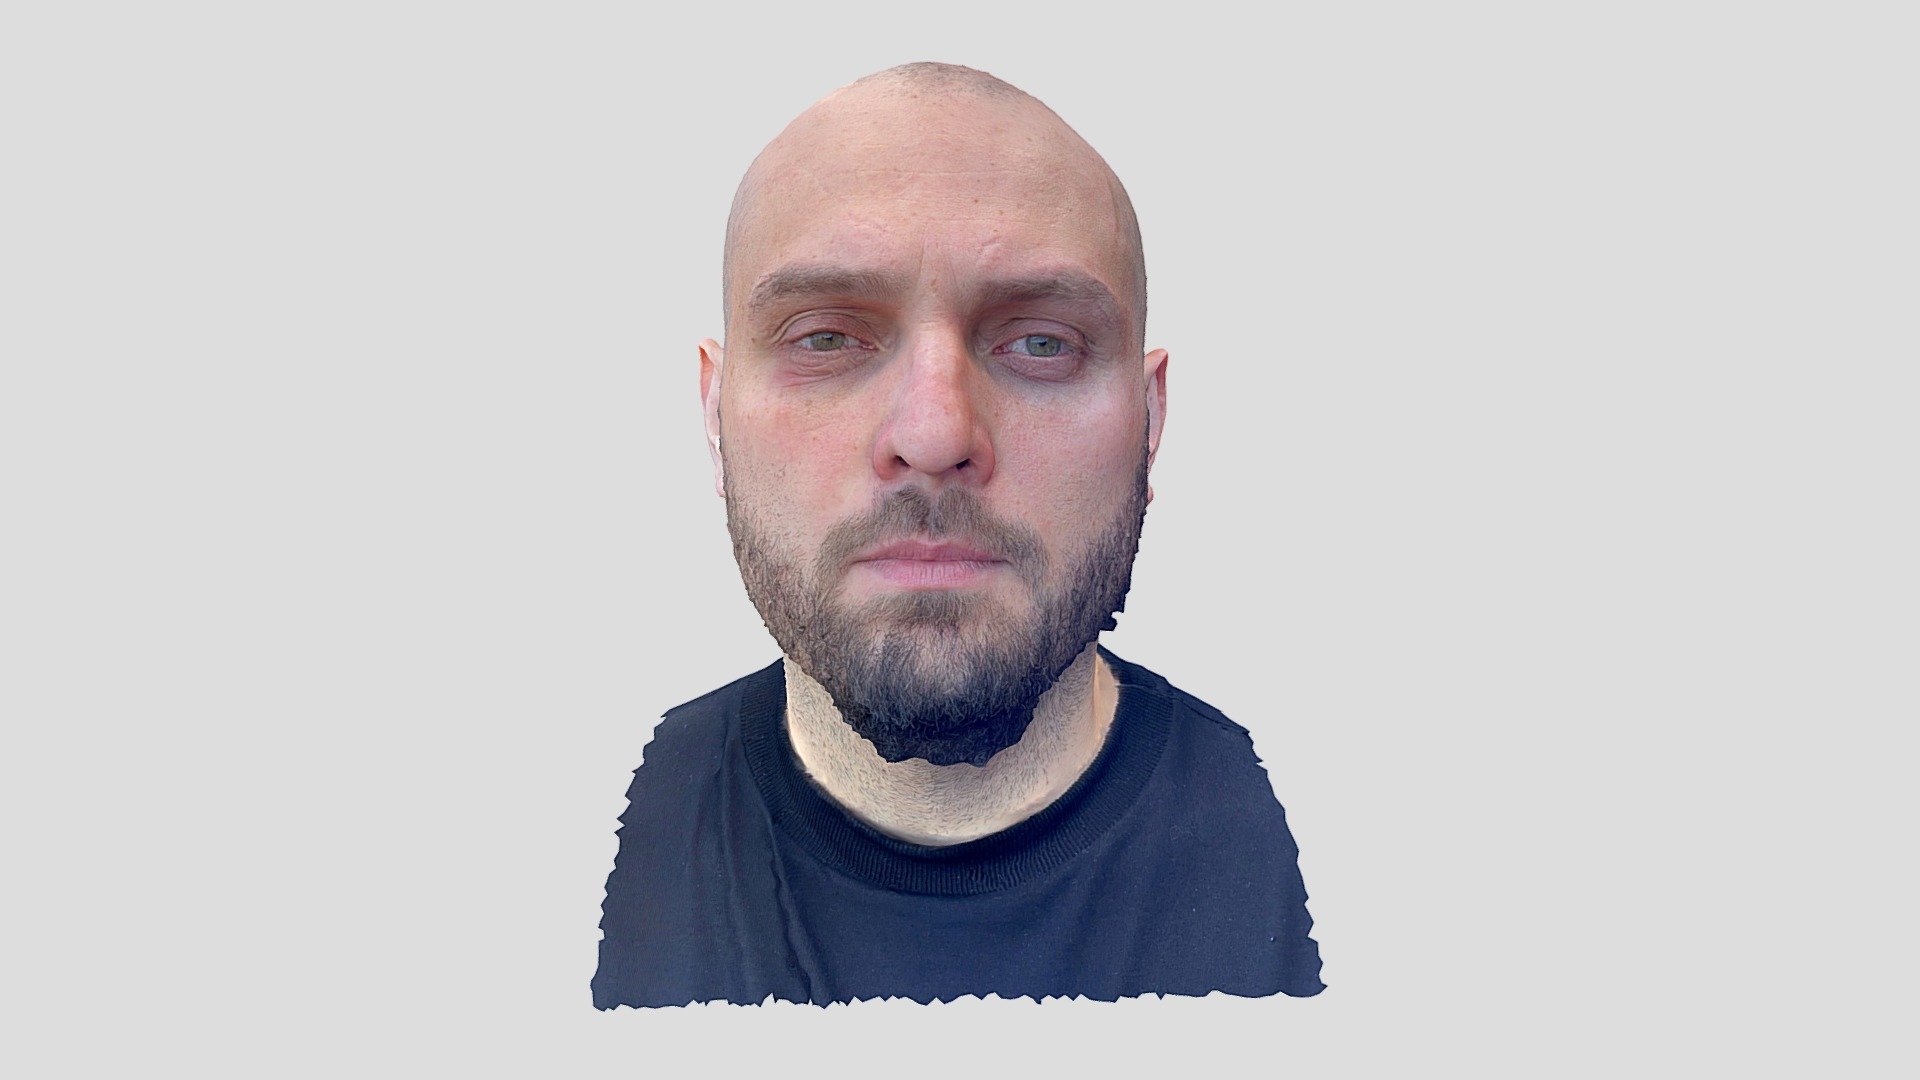 Photorealistic head scan of a bold bearded man.

Shot on iPhone 12 Pro Max, processed in Photocatch app on Macbook Air M1.

P.S. you are welcome to contact me if you need the files 3d model